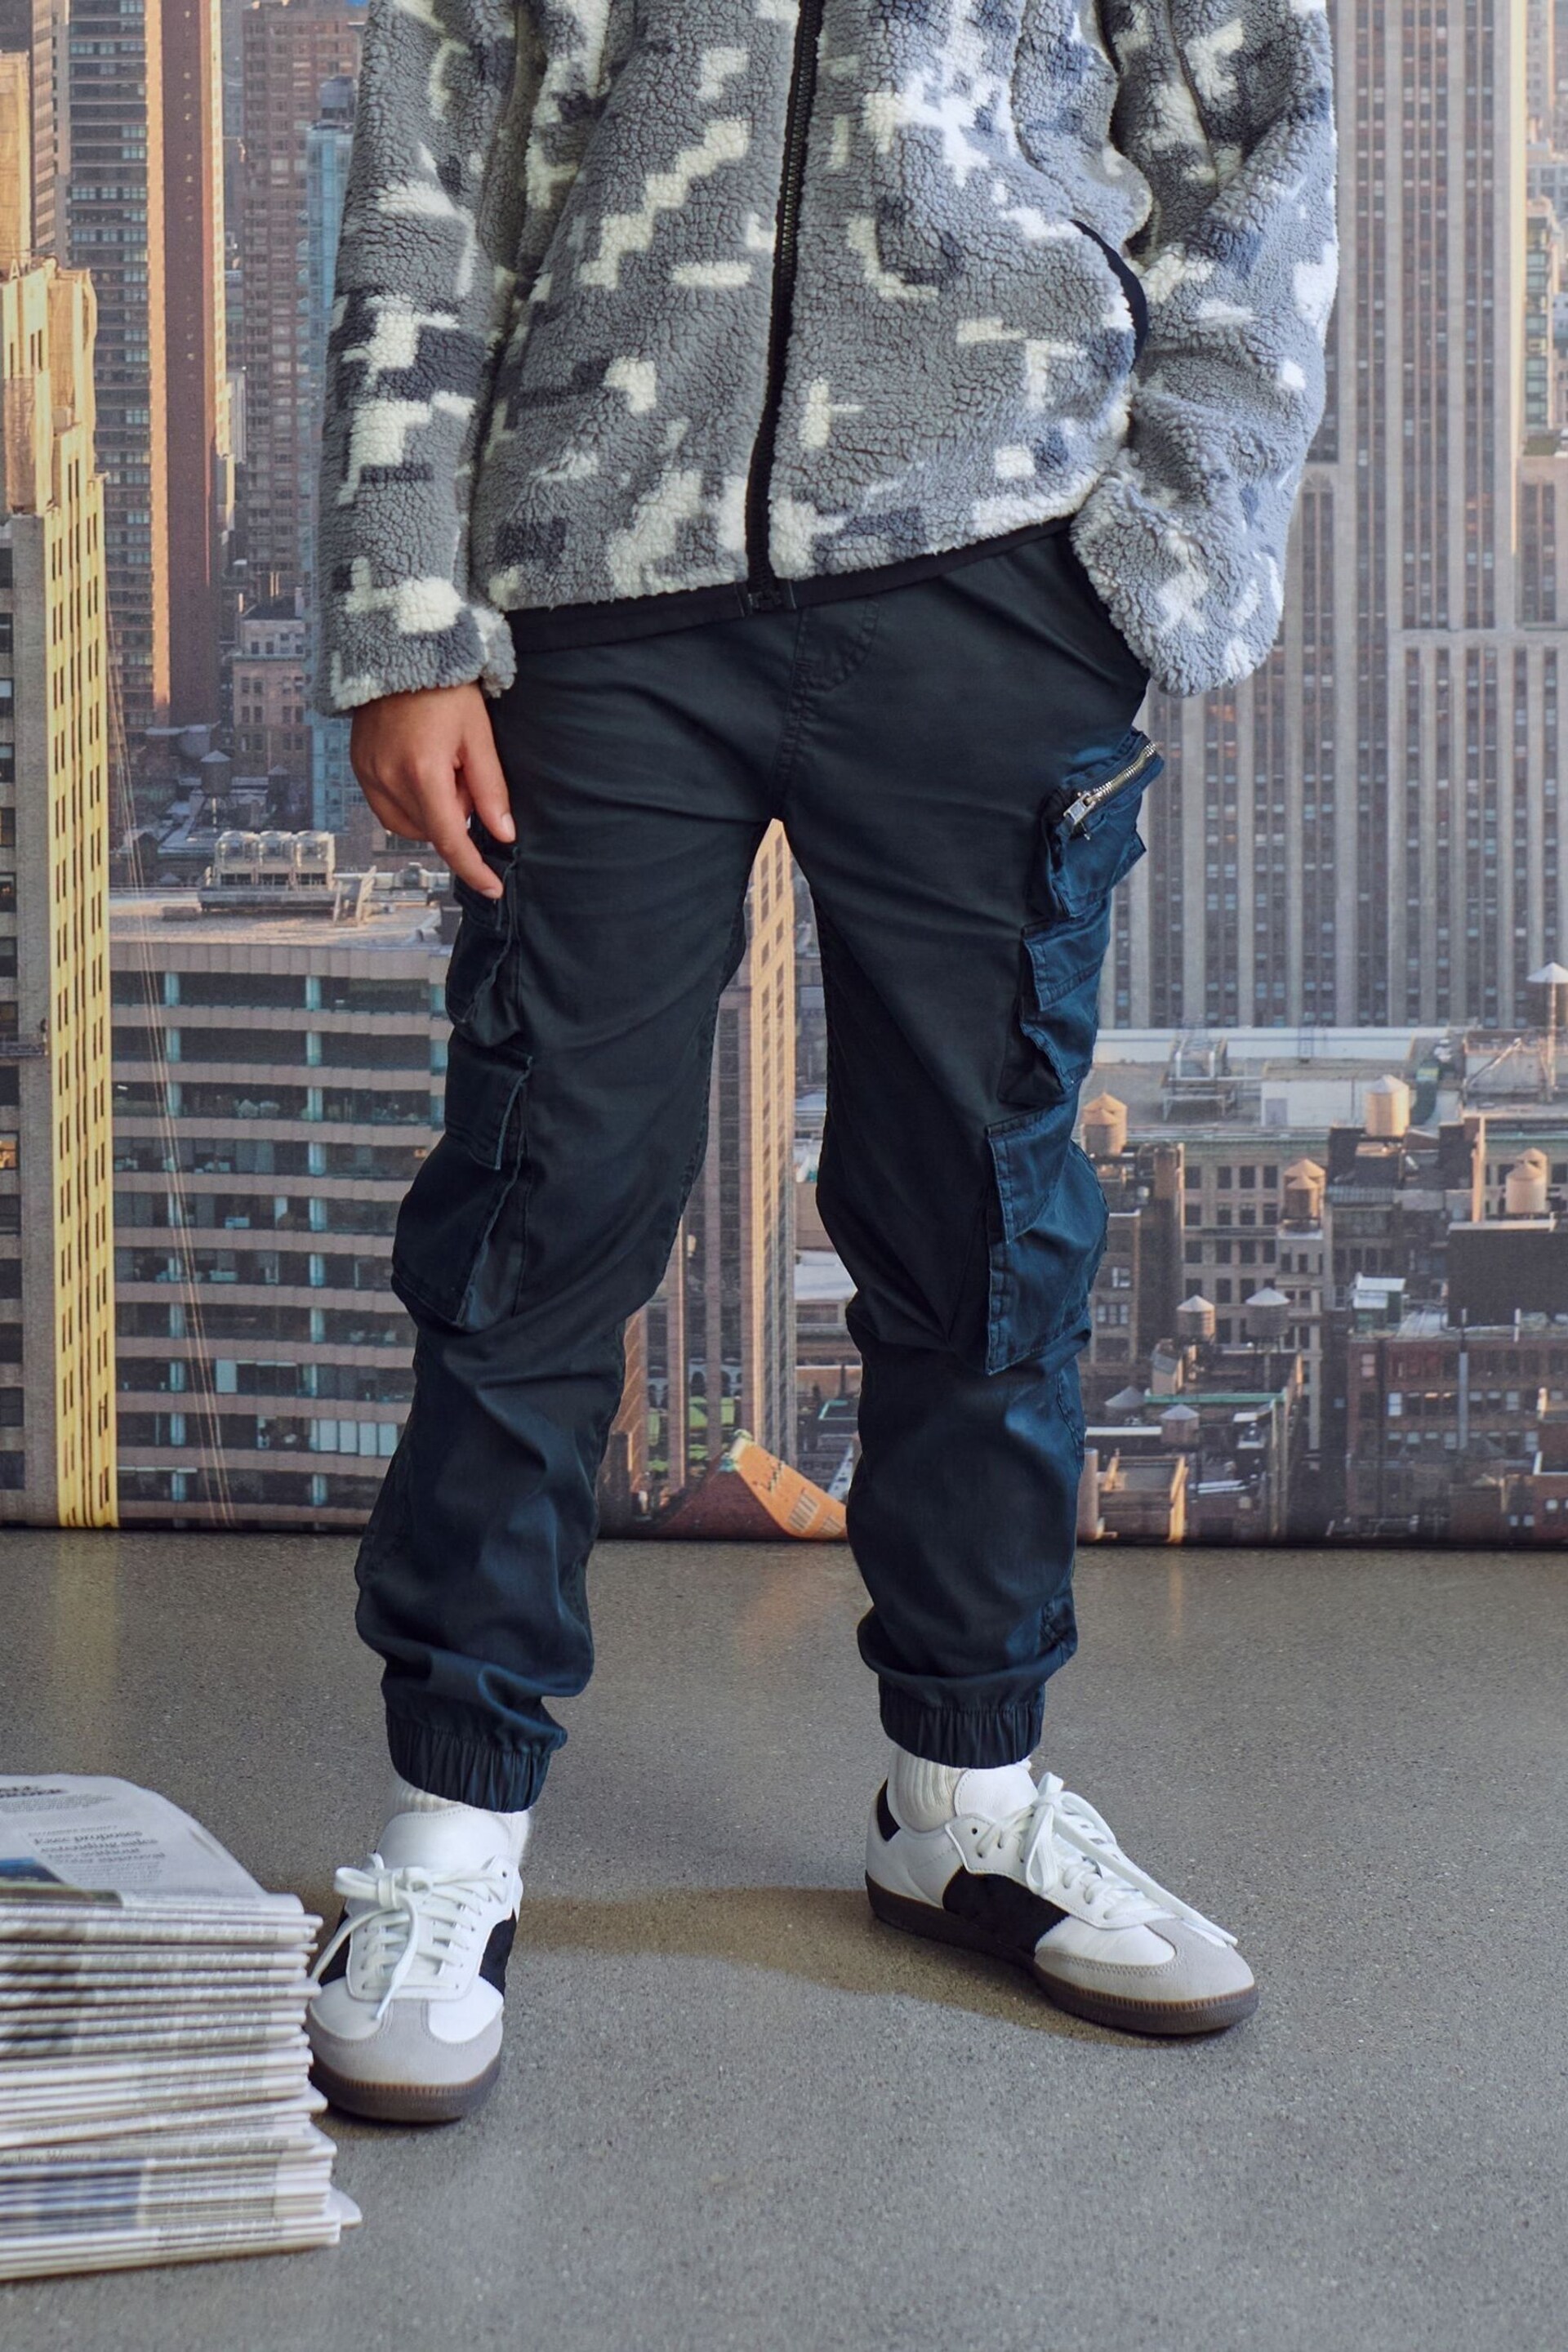 Abercrombie & Fitch Black Cargo Joggers - Image 5 of 9